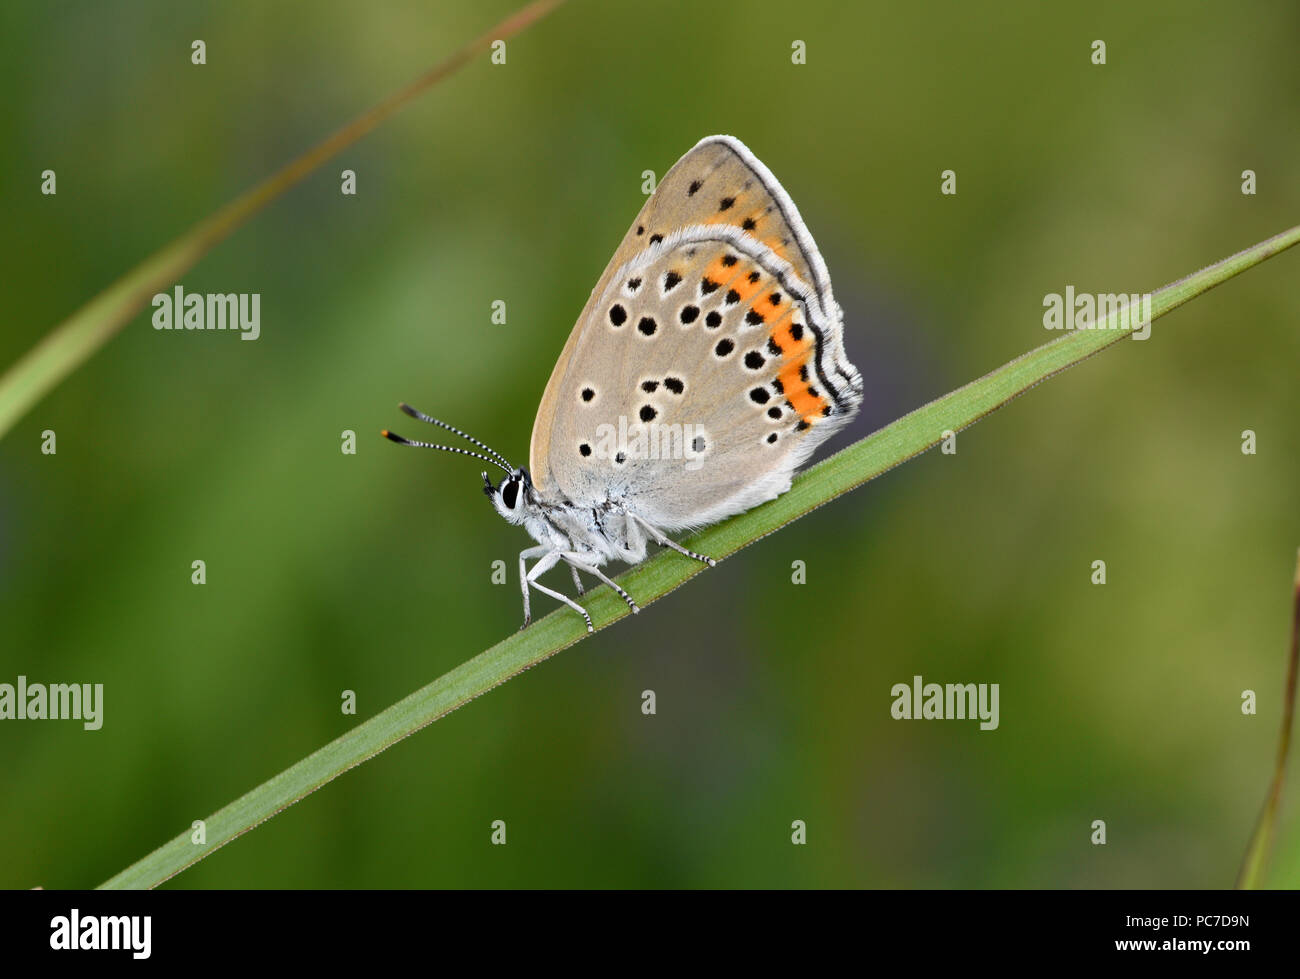 Purple Shot Copper Butterfly (Lycaena alciphron) adult at rest on blade of grass, view of underside of wings, Estonia, July Stock Photo